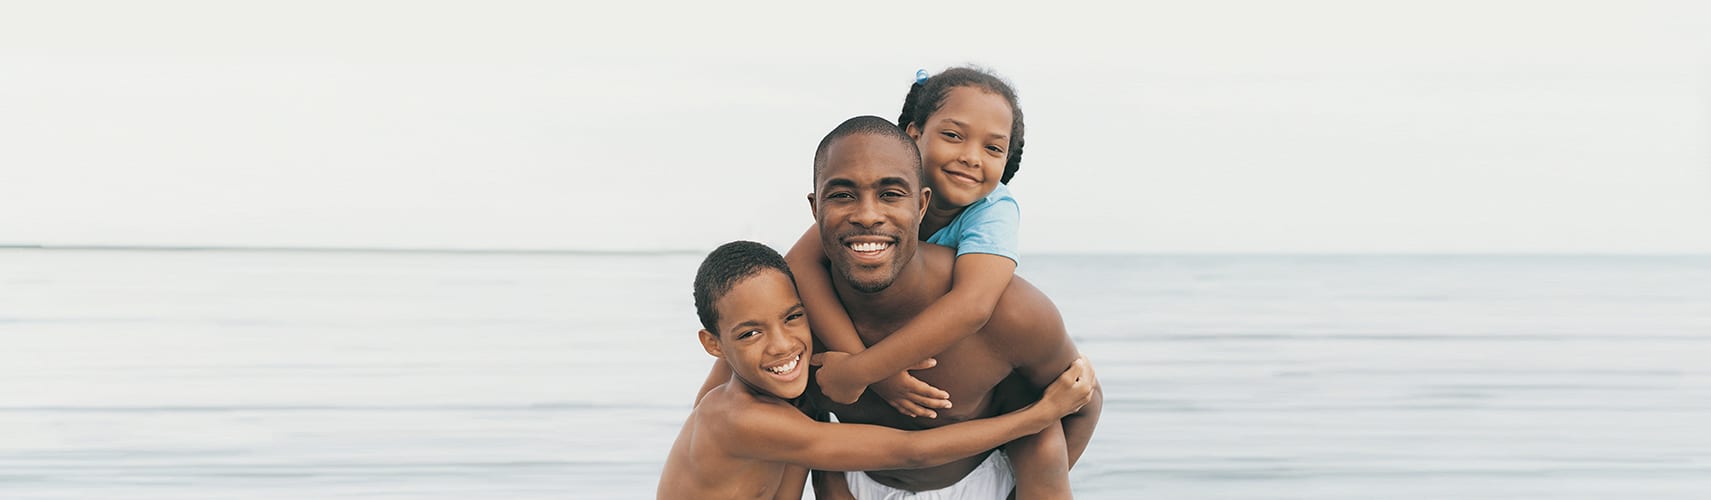 Man on beach with his children standing in front of the ocean